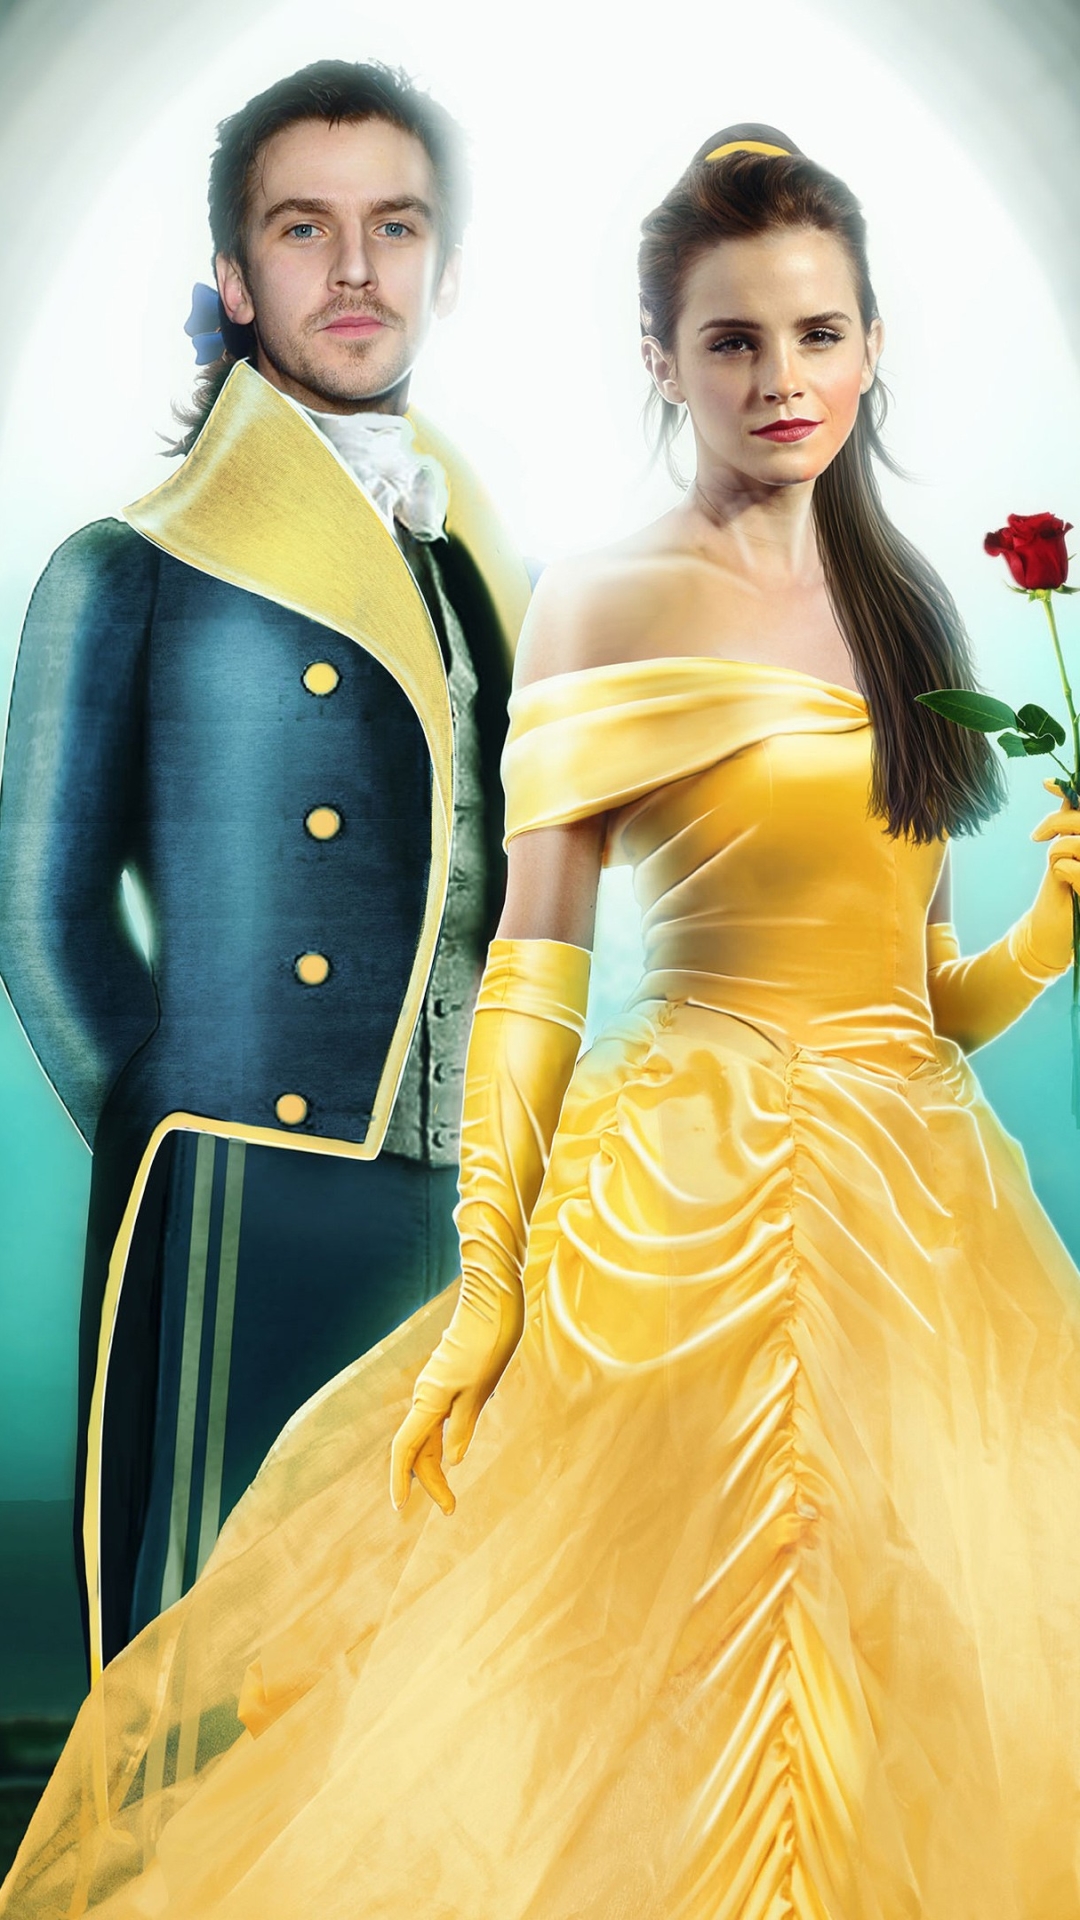 Beauty And The Beast (2017) Phone Wallpaper